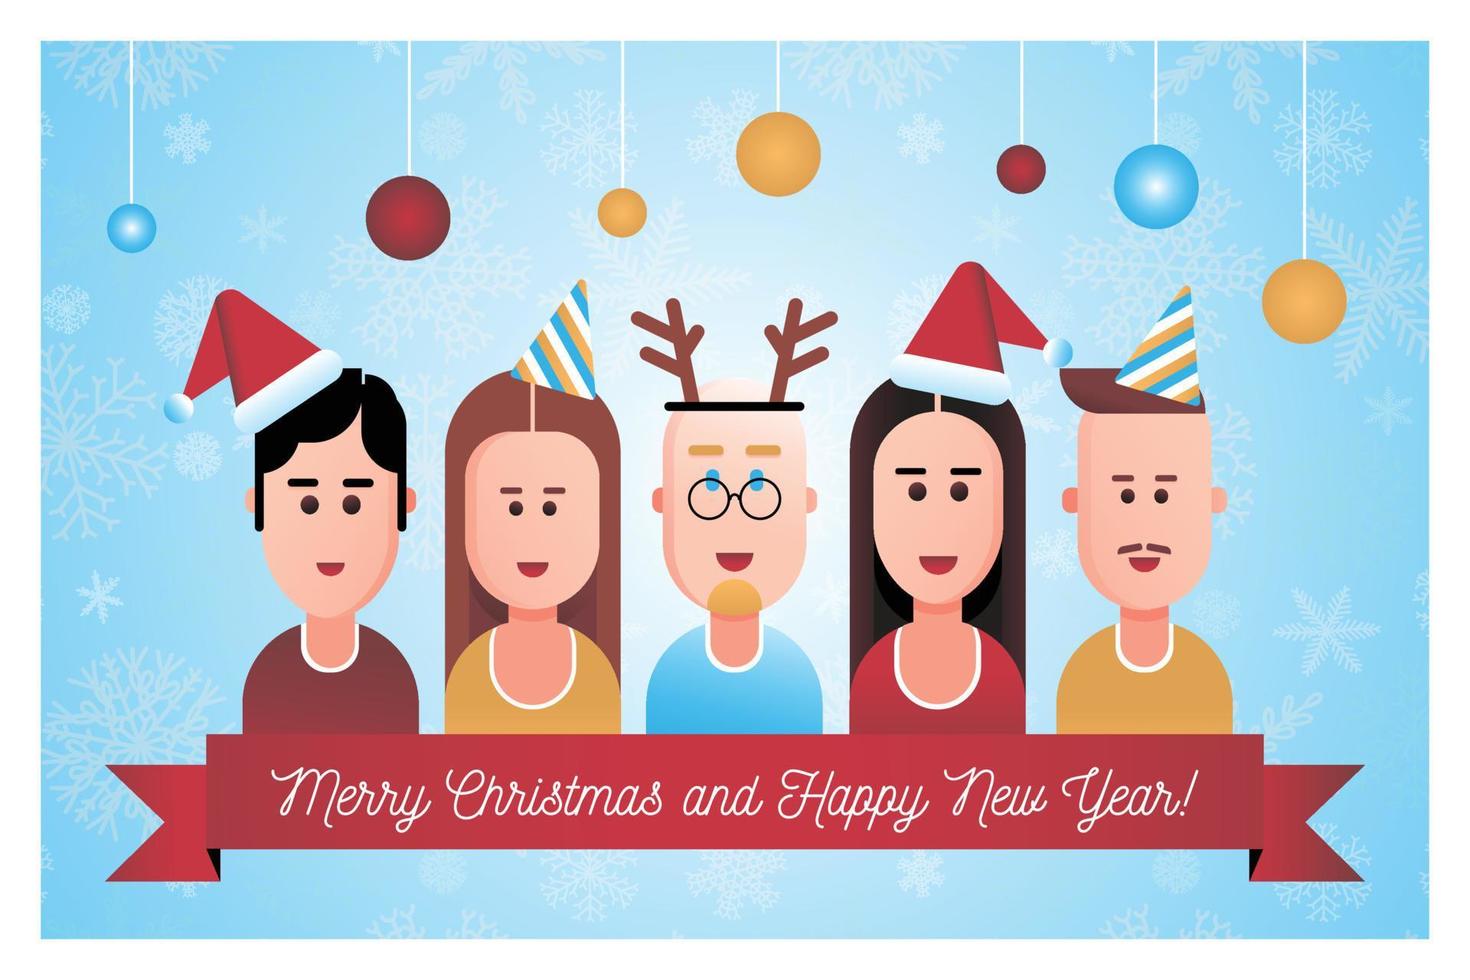 Happy New Year and Christmas greeting. Guys and girls in festive headdresses in flat design style vector